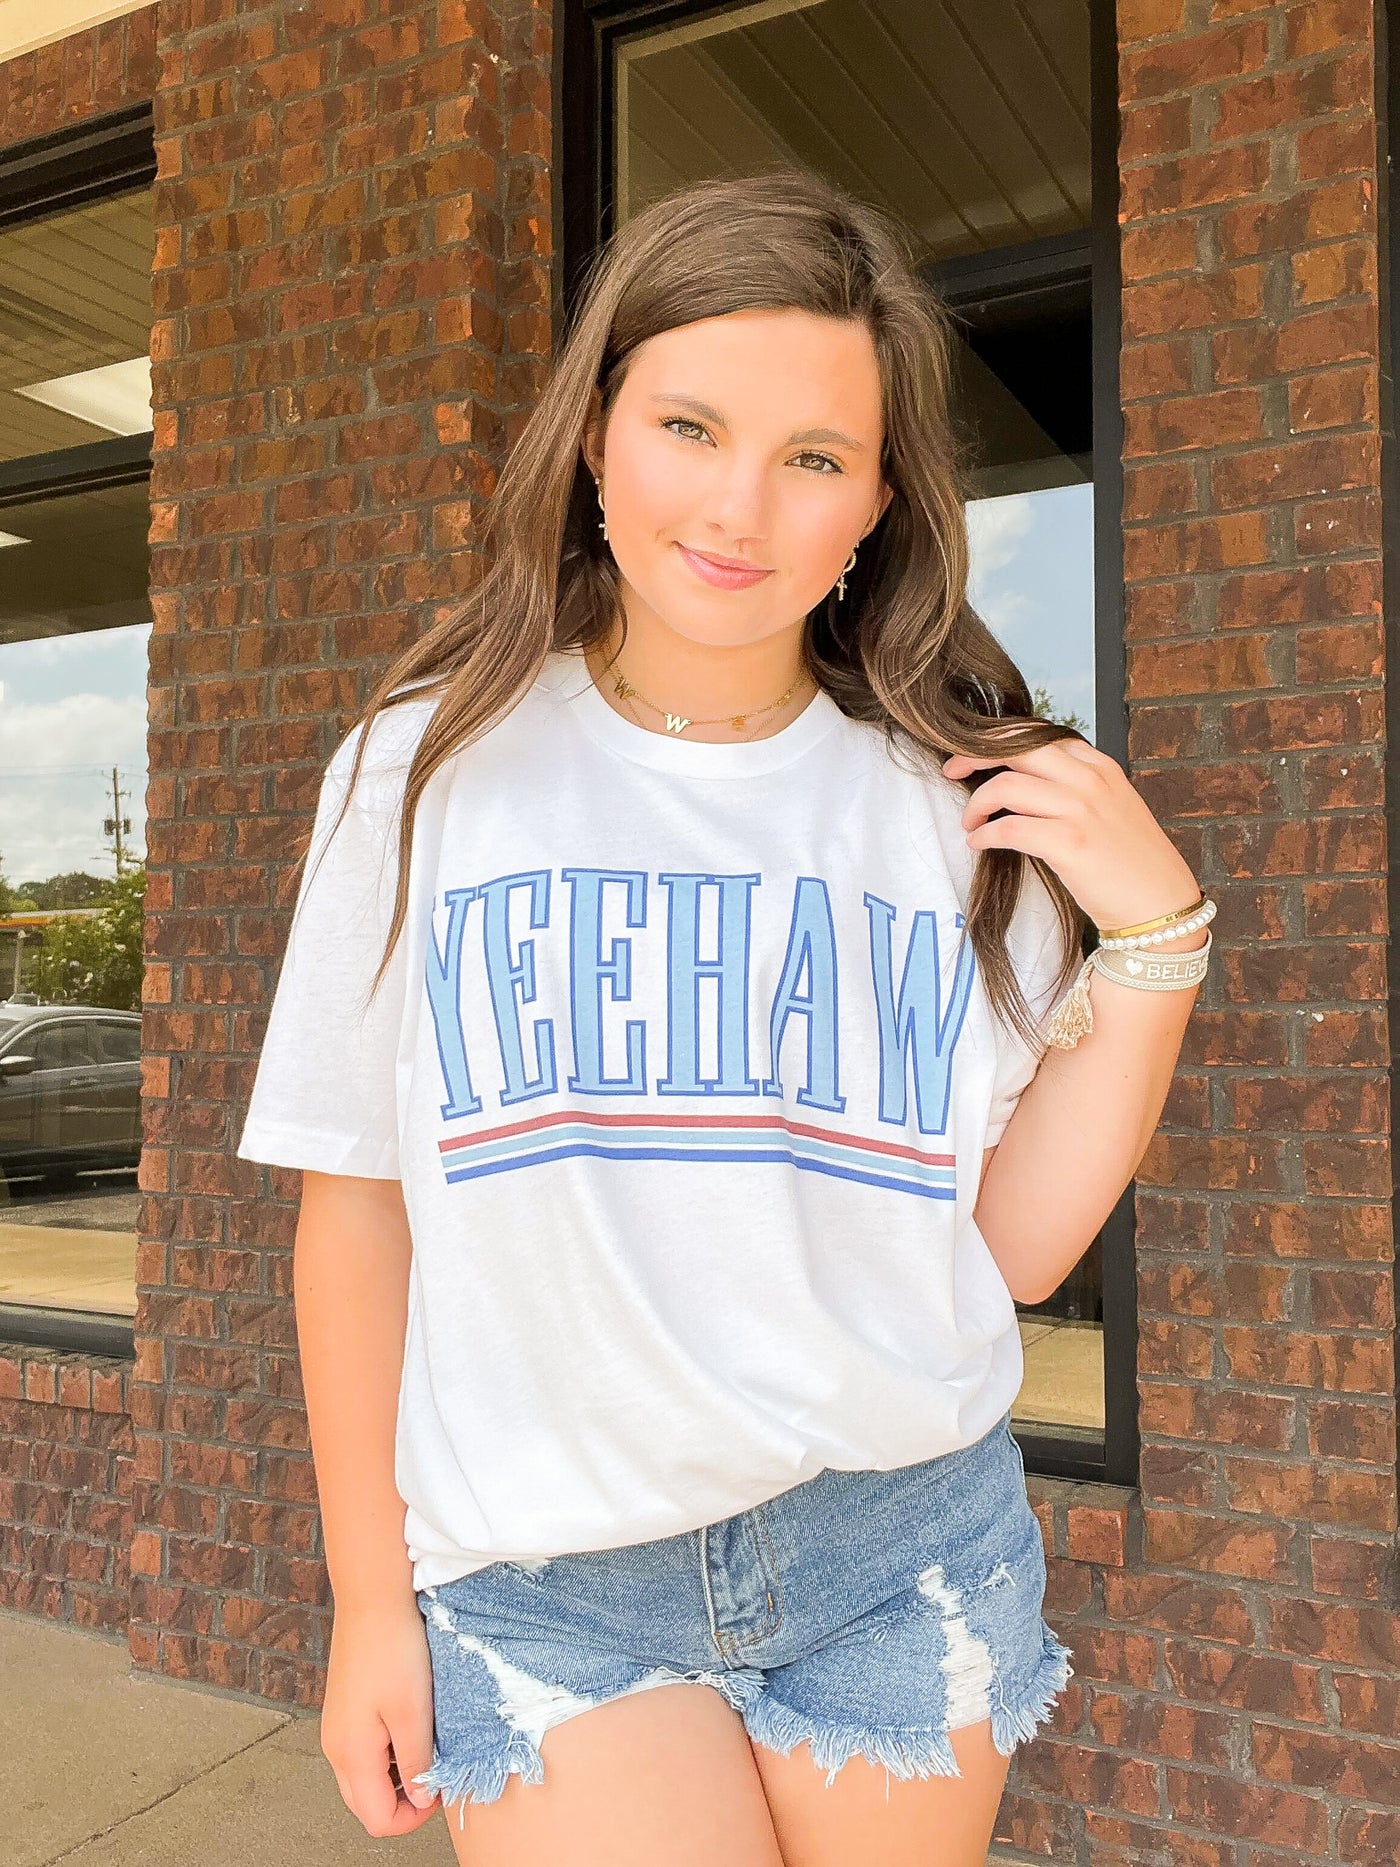 Yeehaw Graphic Tee-135 - DEMAND GRAPHIC-LEATHER & LACE-[option4]-[option5]-[option6]-Leather & Lace Boutique Shop